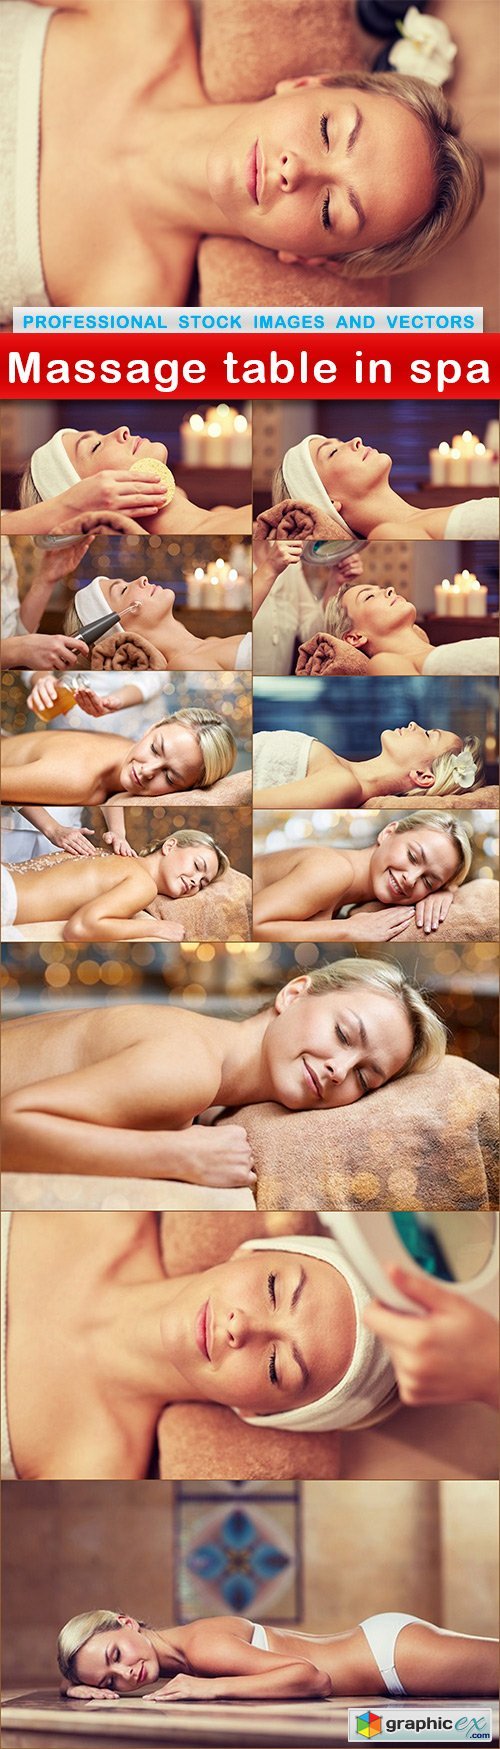 Massage table in spa - 12 UHQ JPEG